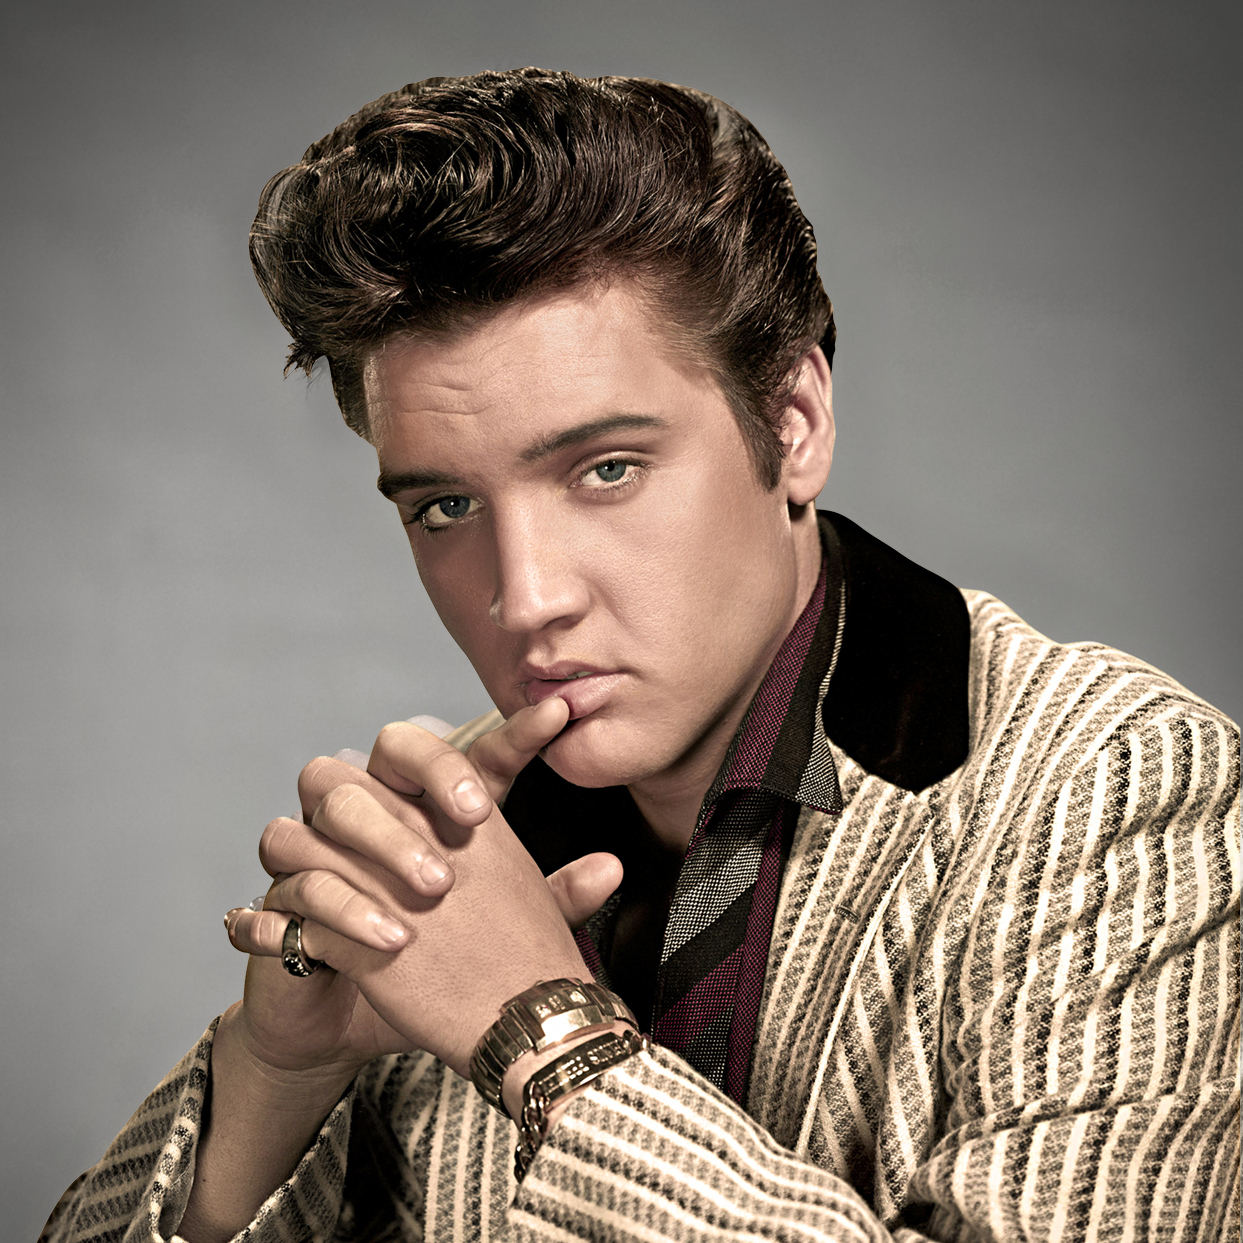 Elvis Once Released An Album So Bad It's Been Called 'The Worst Rock And Roll Album Of All Time'